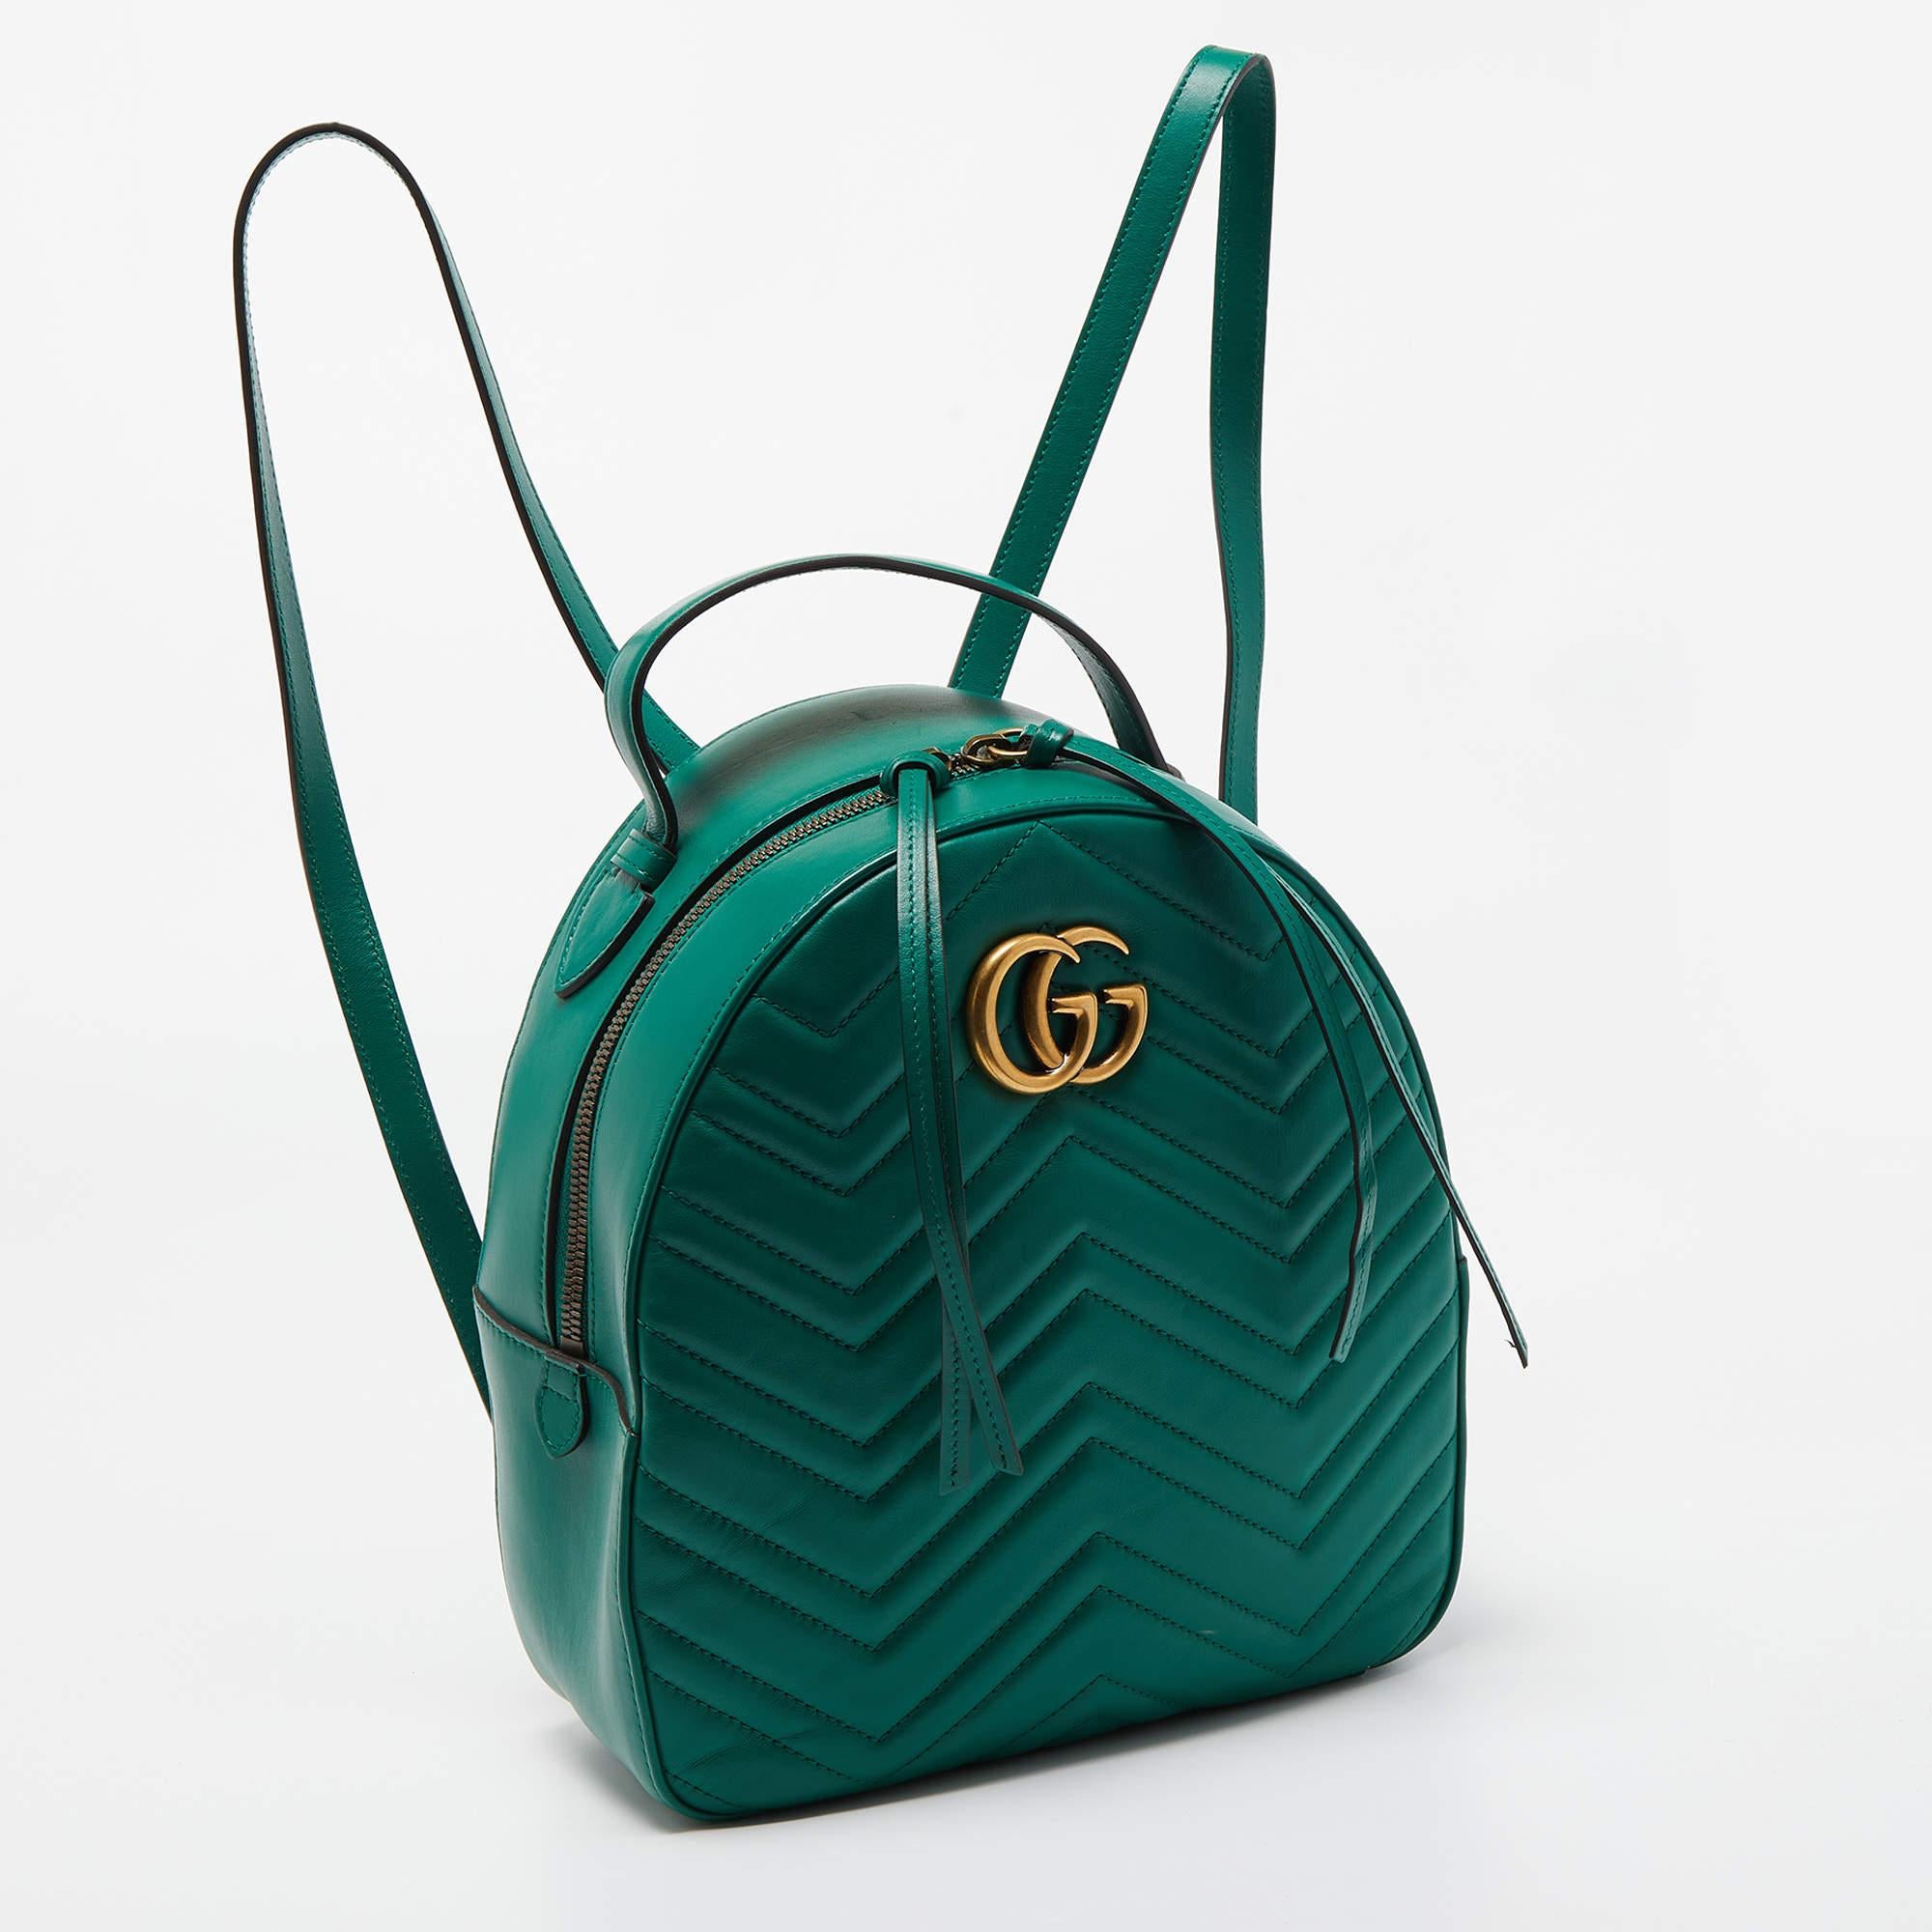 This Gucci backpack in green is carefully crafted to offer you a luxurious accessory you will cherish. It is marked by high quality and enduring appeal. Invest in it today!

